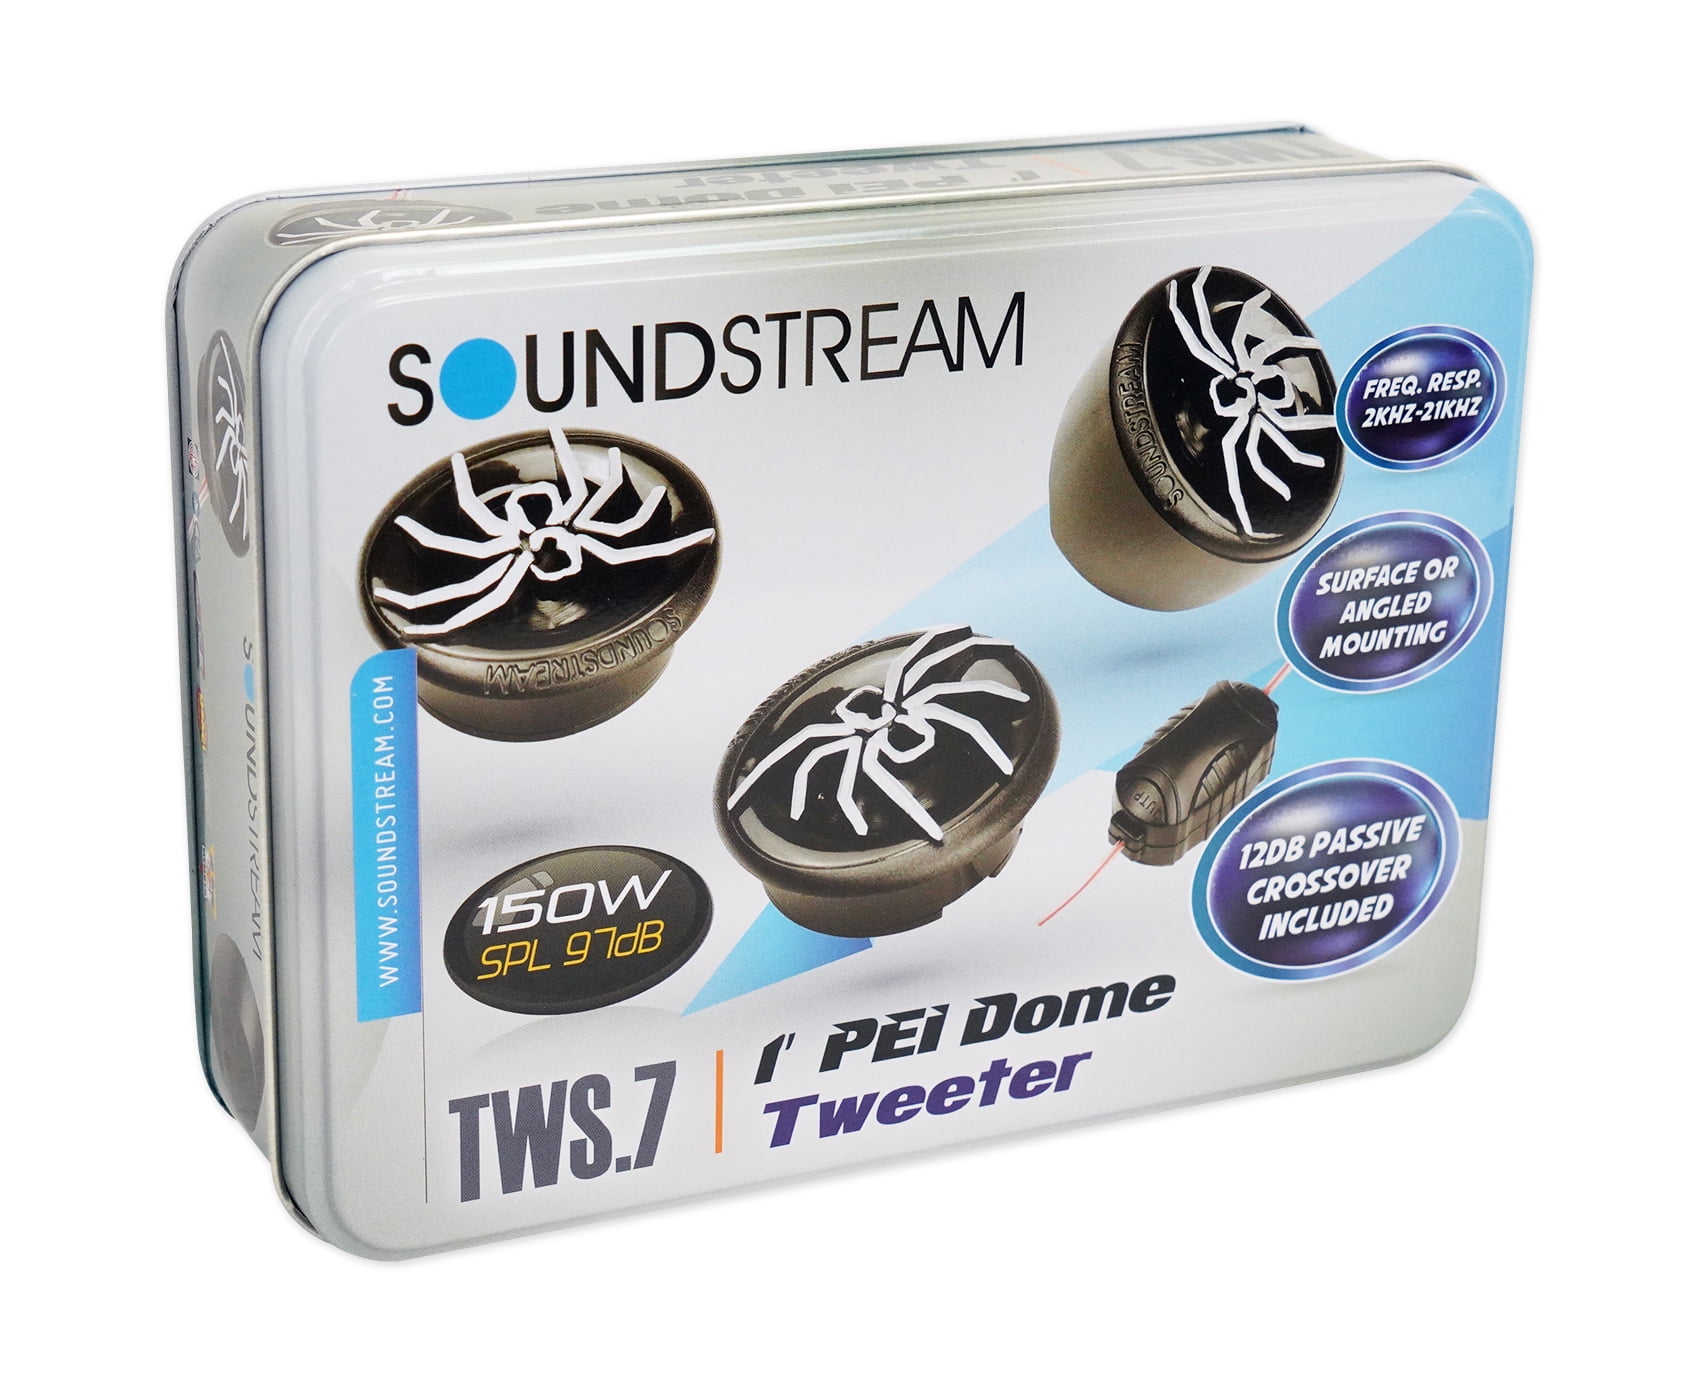 SOUNDSTREAM TWS.4 1" 200W COMPONENT CAR STEREO MICRO DOME TWEETERS SET 